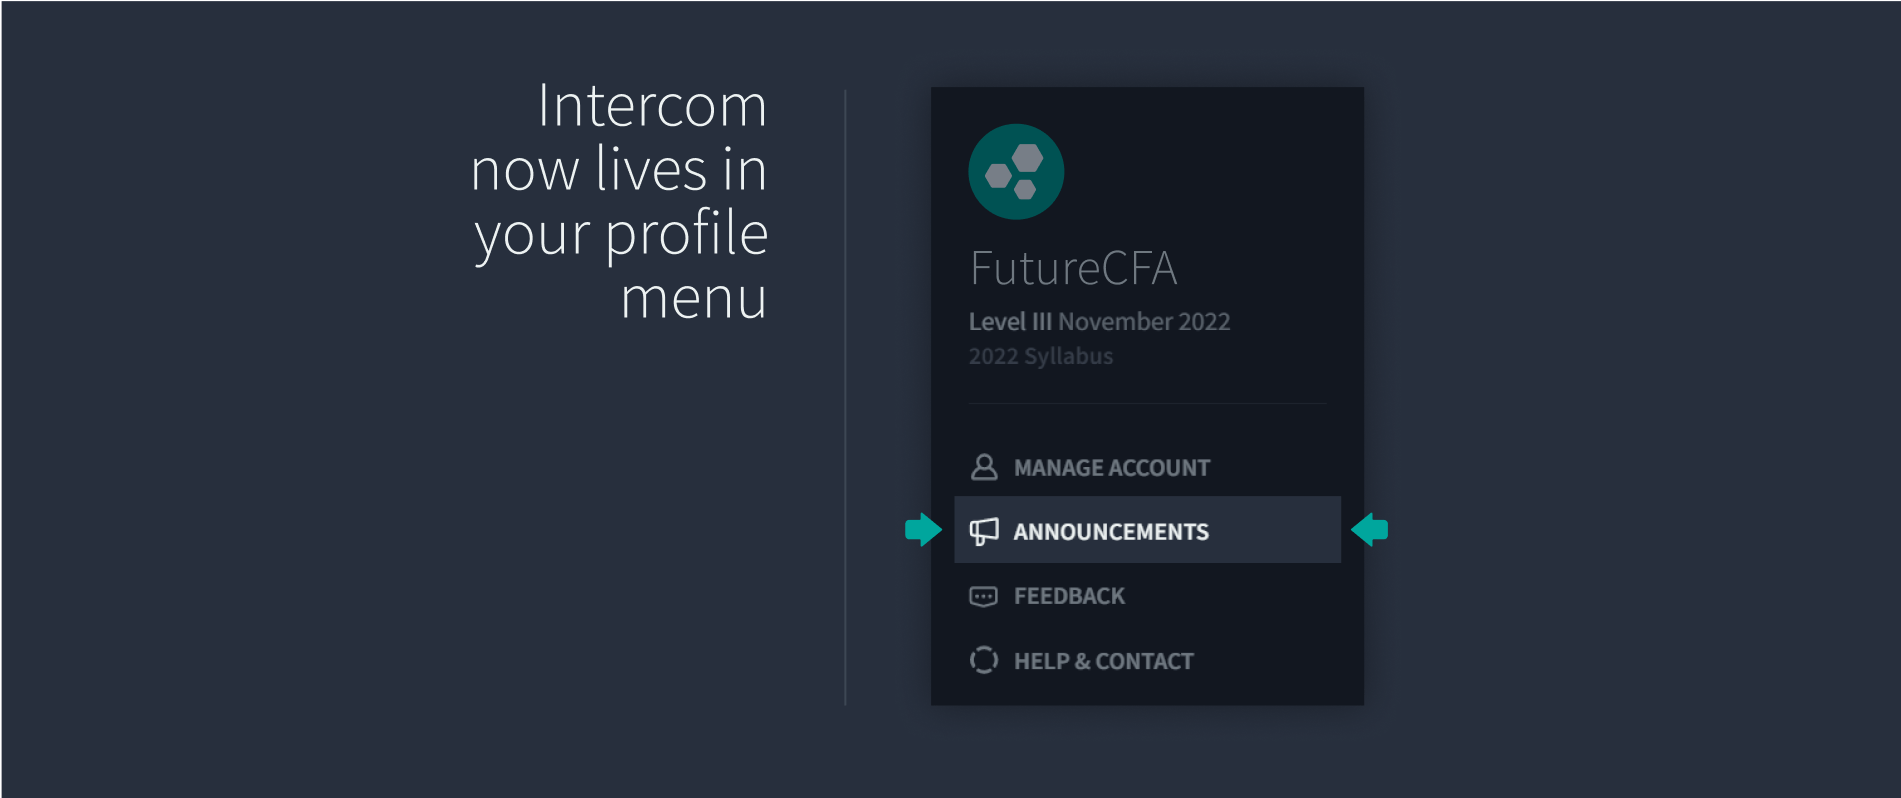 Intercom now lives in your profile menu. Visual includes a look at the Salt Solutions profile menu highlighting "ANNOUNCEMENTS."